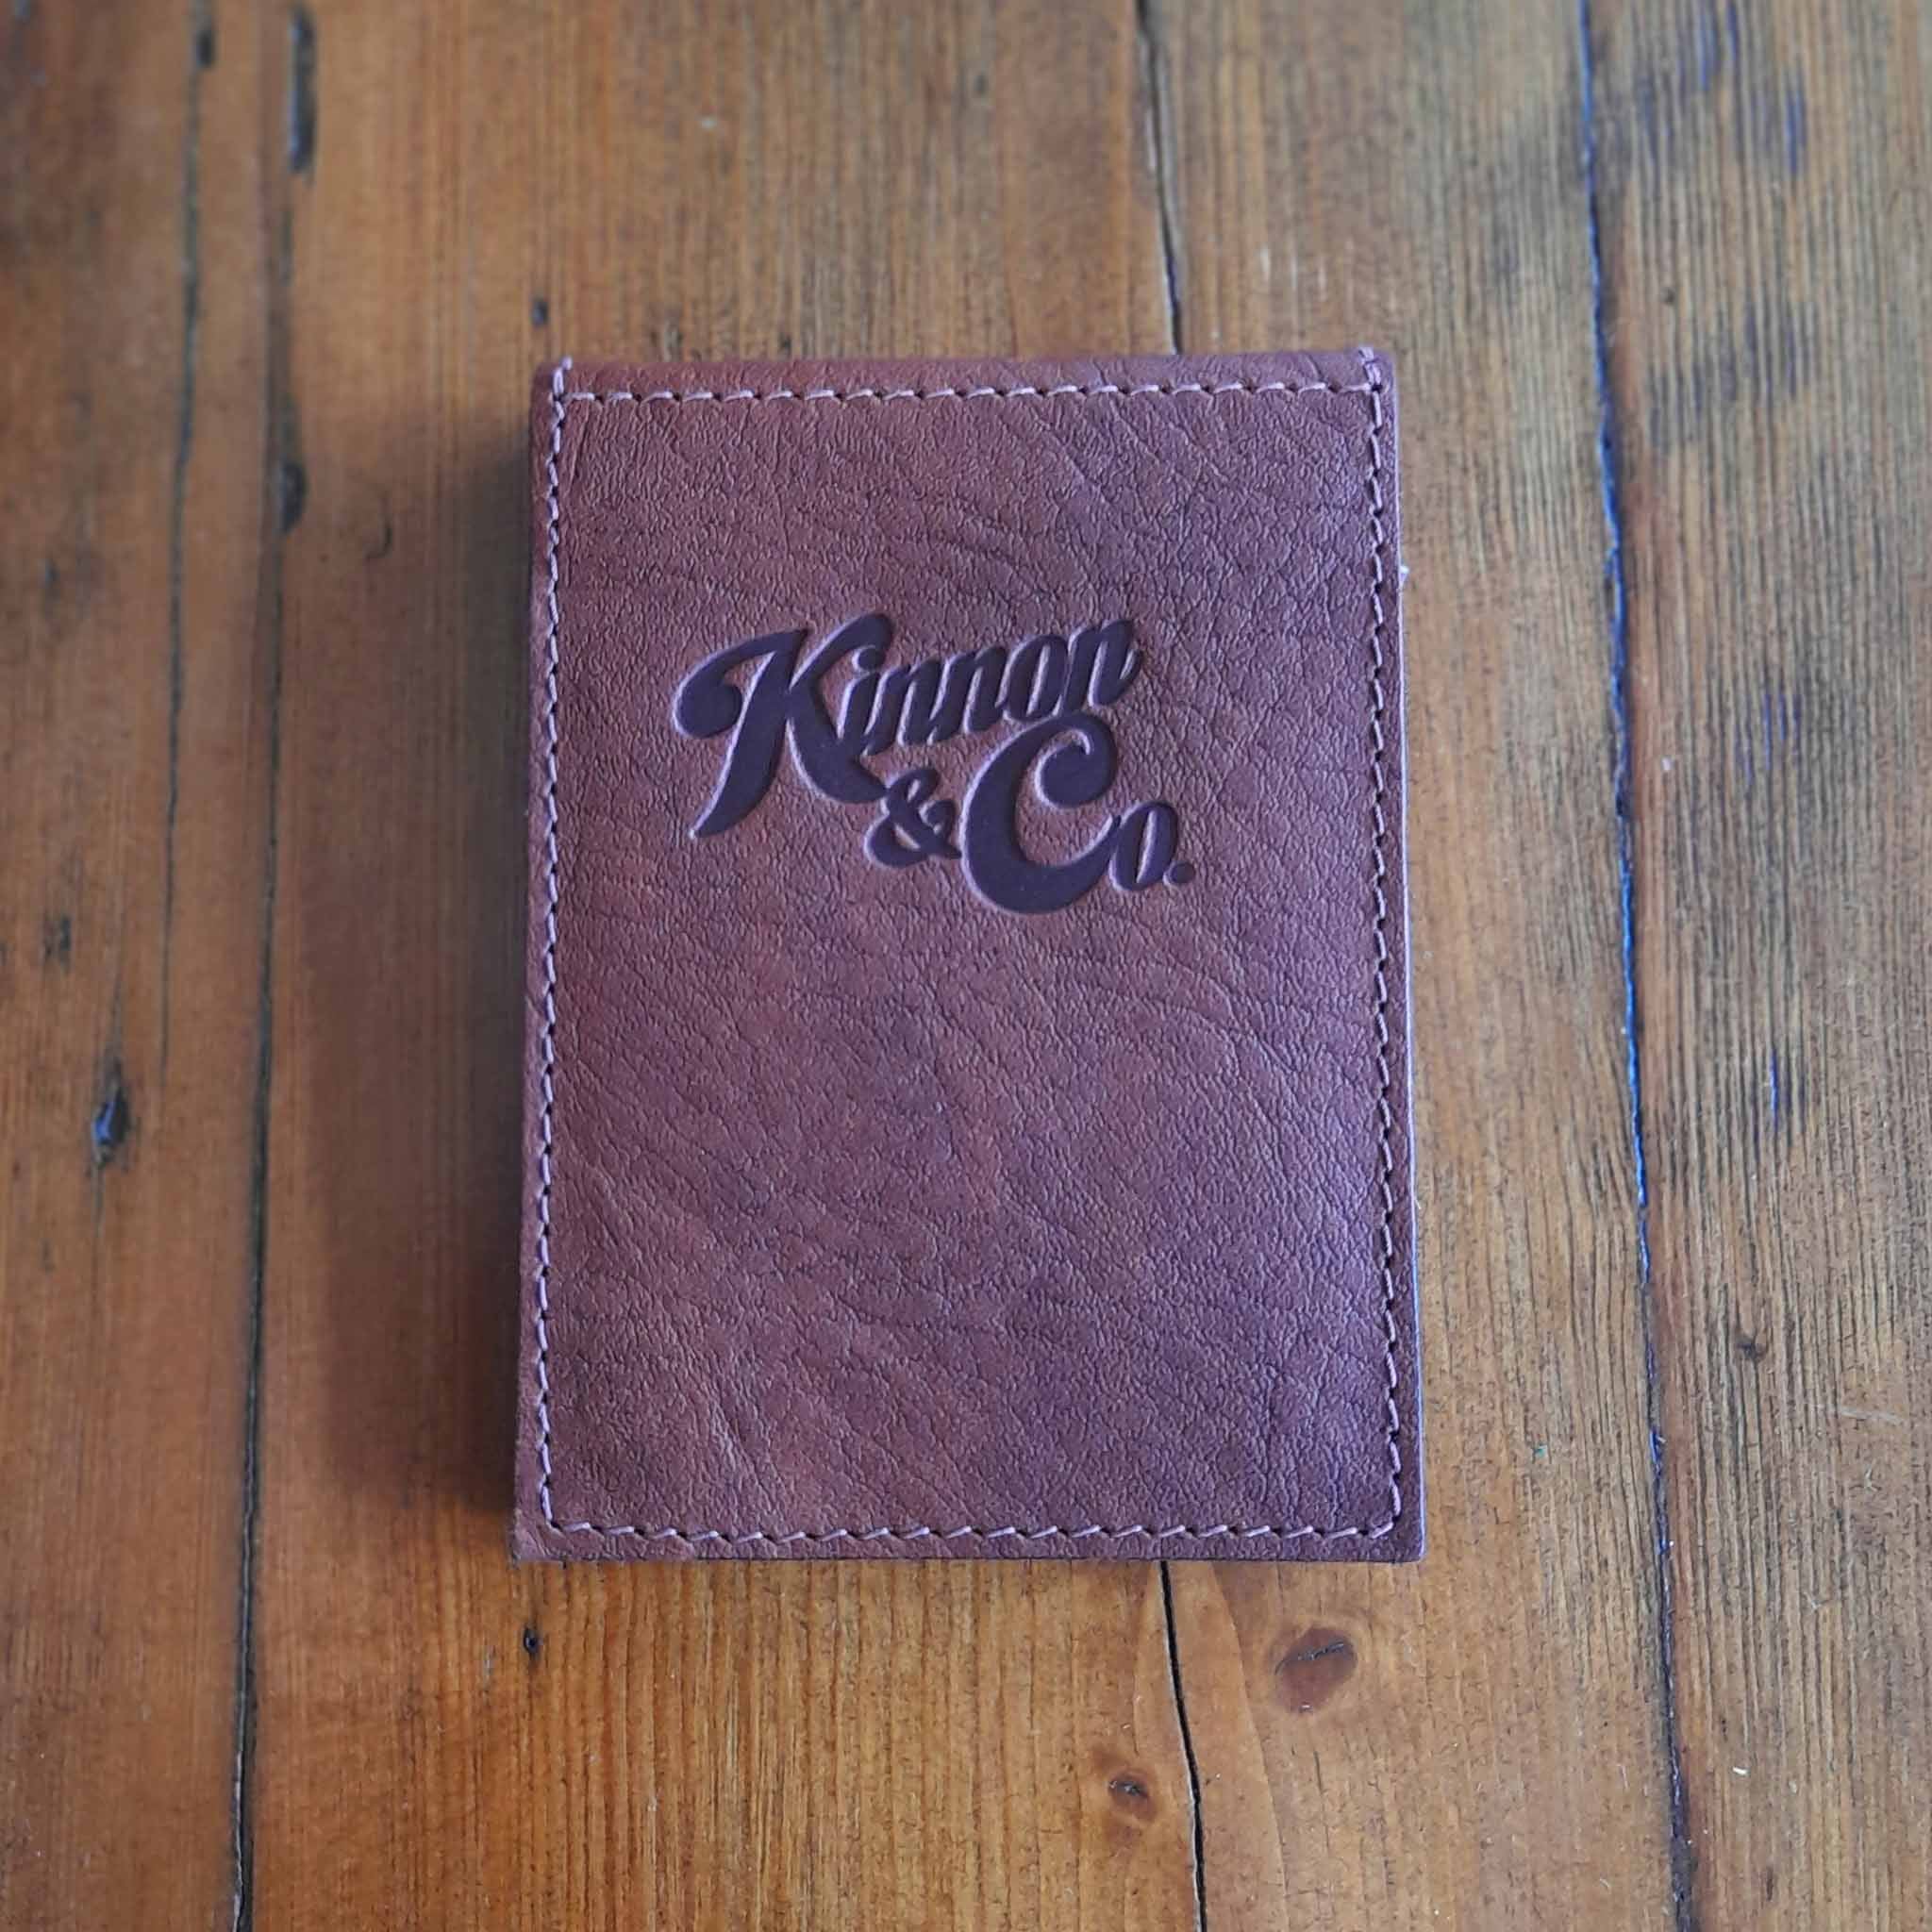 Kinnon and Co branded Pocket sized Tan Leather Notepad.